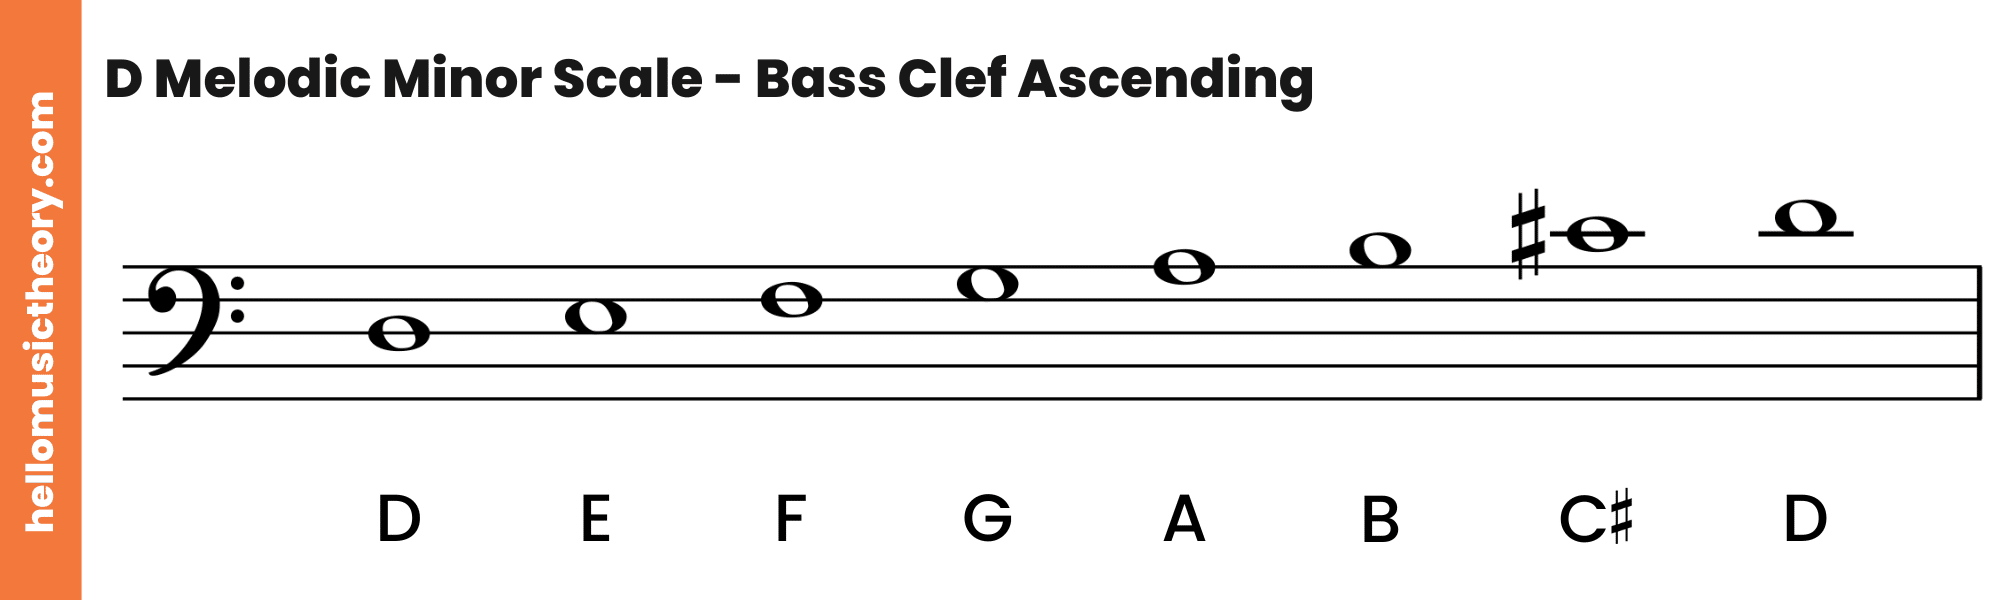 D Melodic Minor Scale Bass Clef Ascending